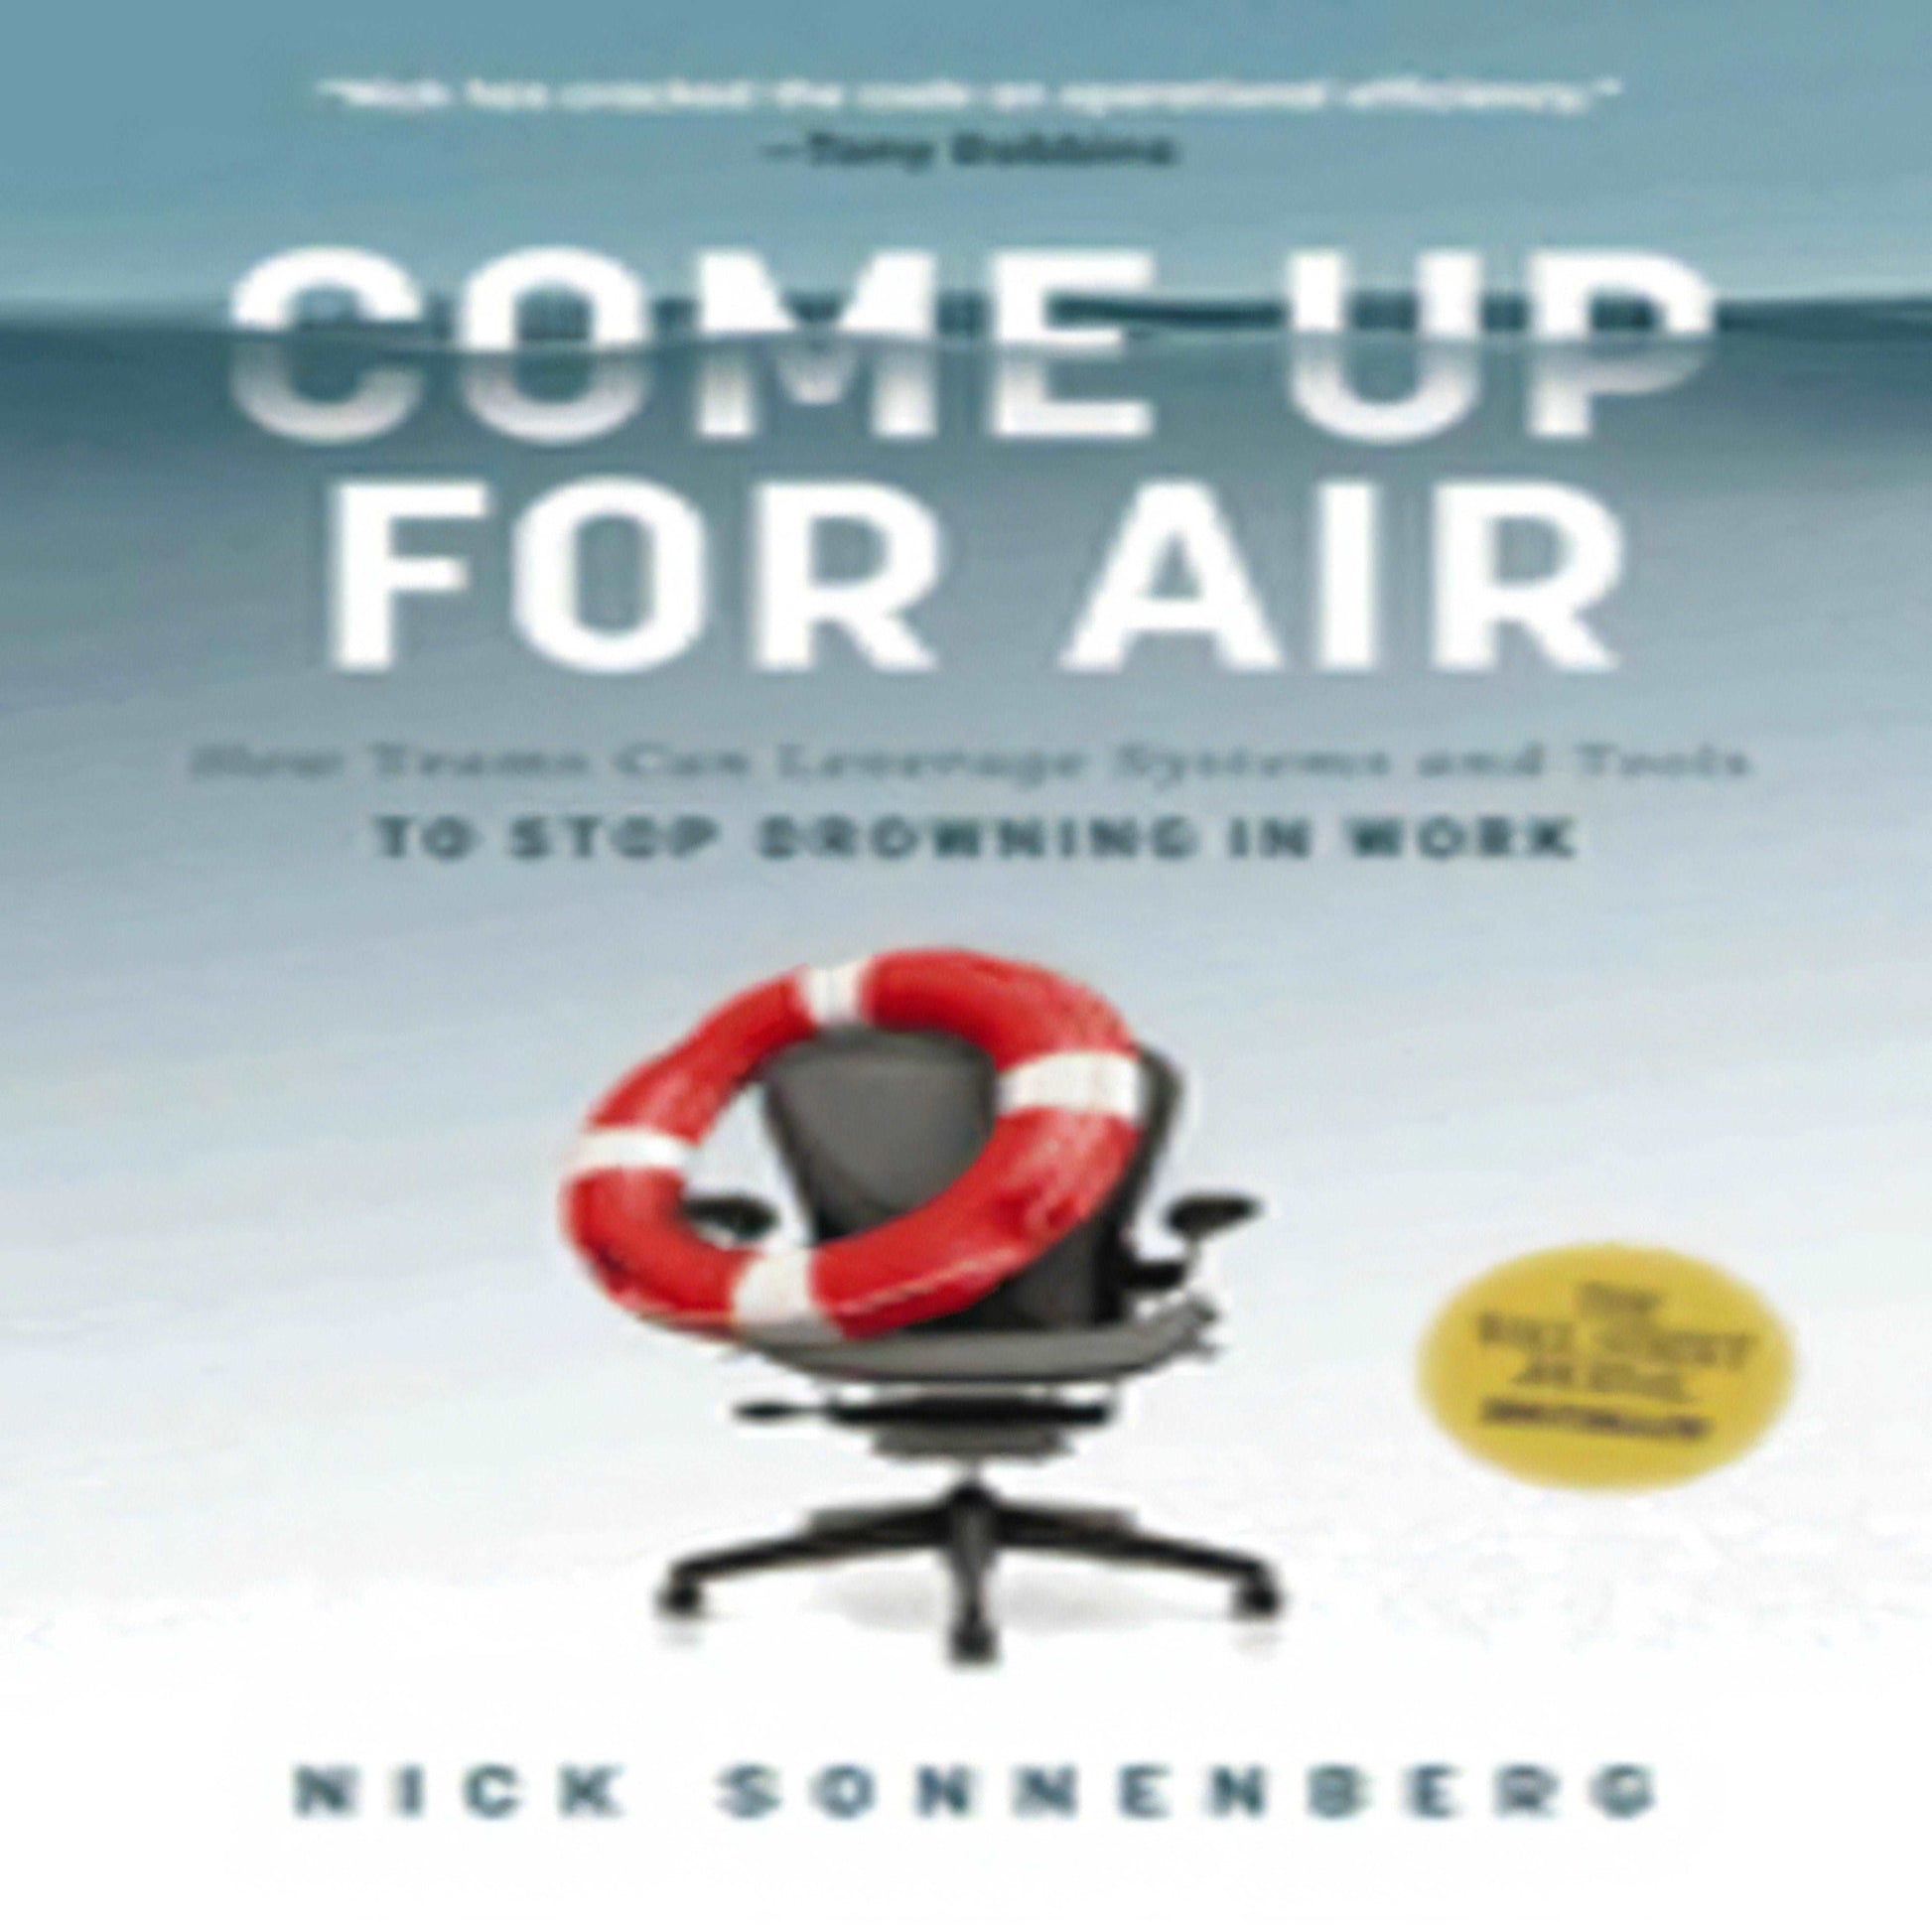 Come Up for Air: How Teams Can Leverage Systems and Tools to Stop Drowning in Work241-031723-140023672XDPGBOOKSTORE.COM. Today's Bestsellers.